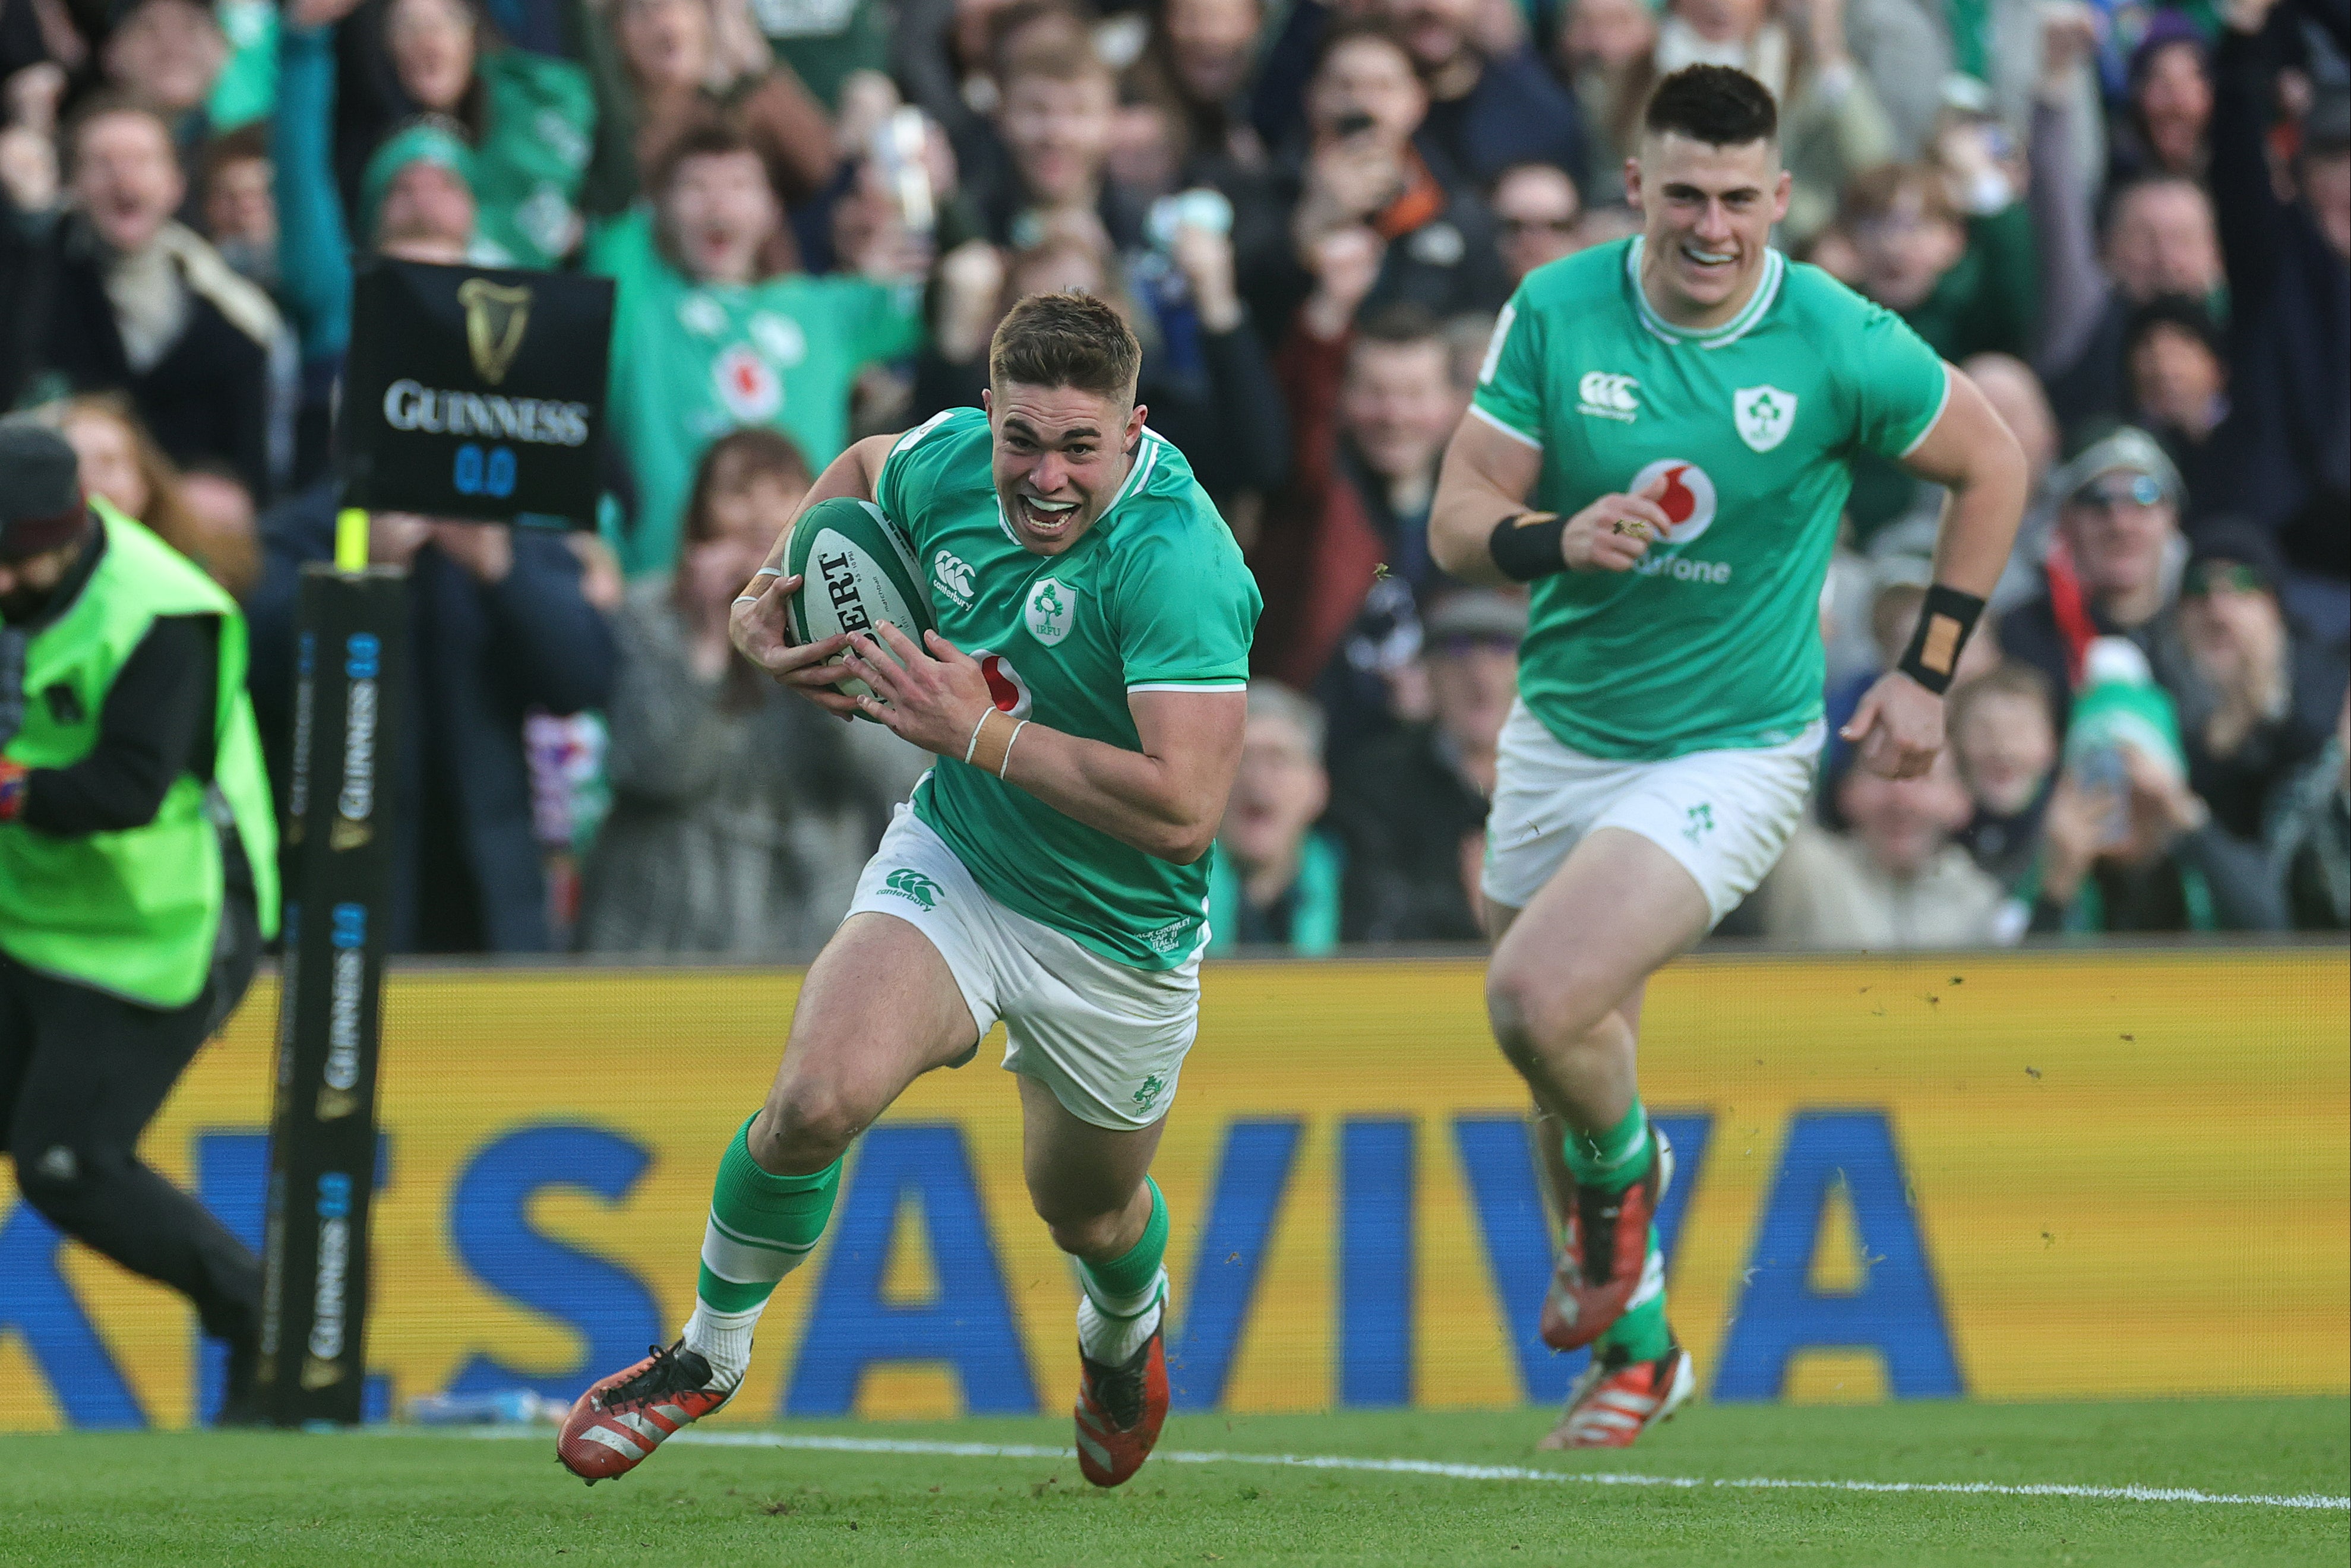 Jack Crowley has impressed for Ireland during this Six Nations